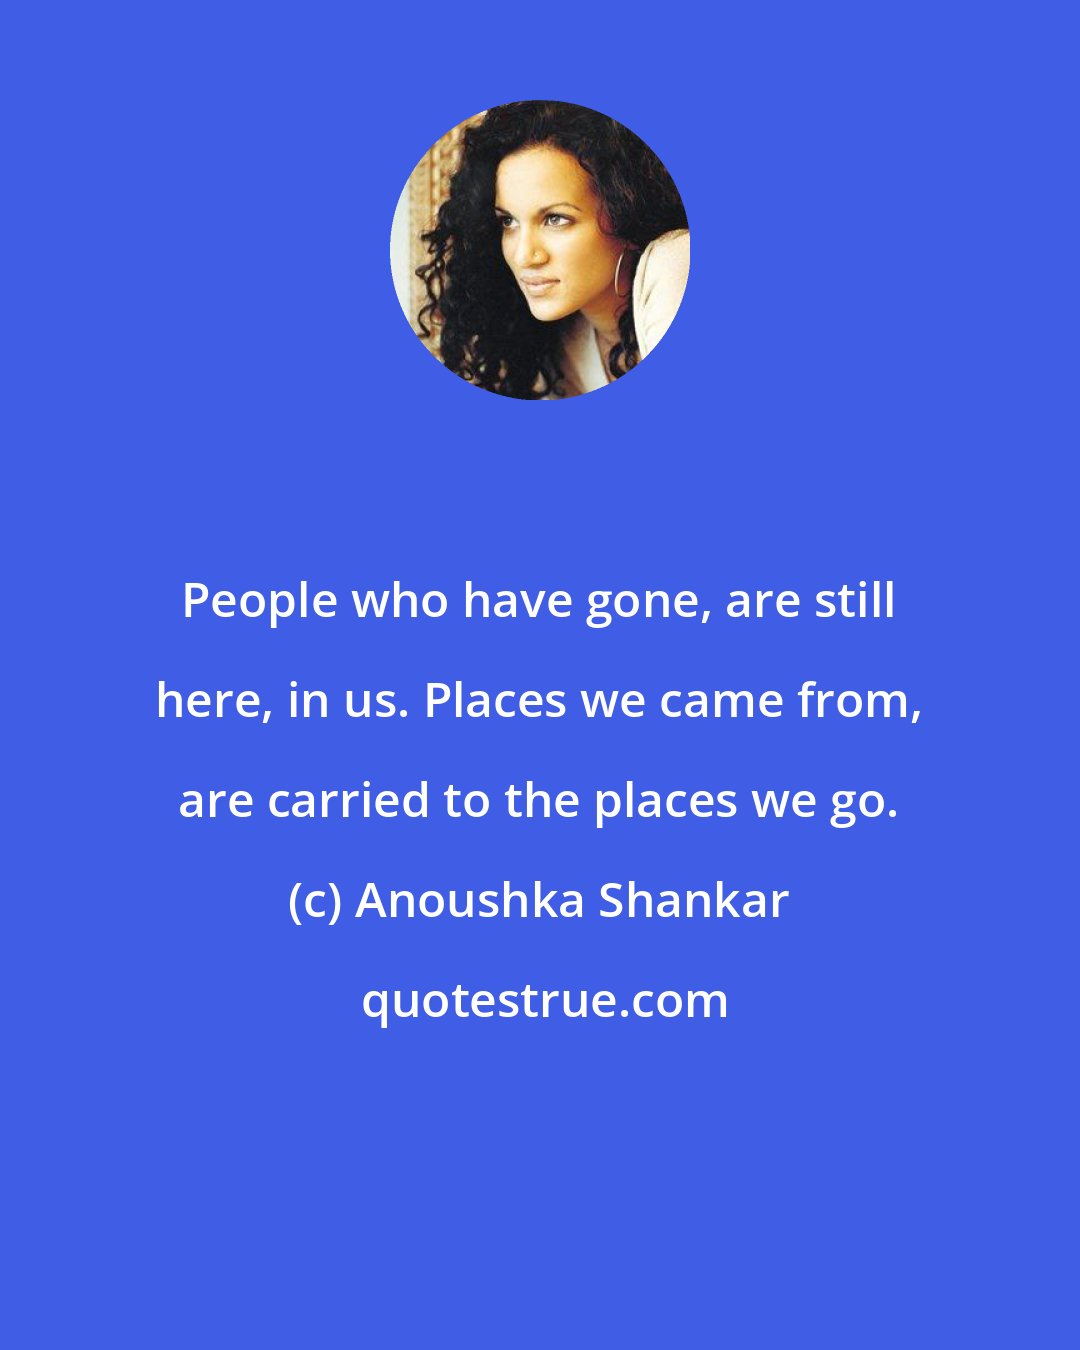 Anoushka Shankar: People who have gone, are still here, in us. Places we came from, are carried to the places we go.